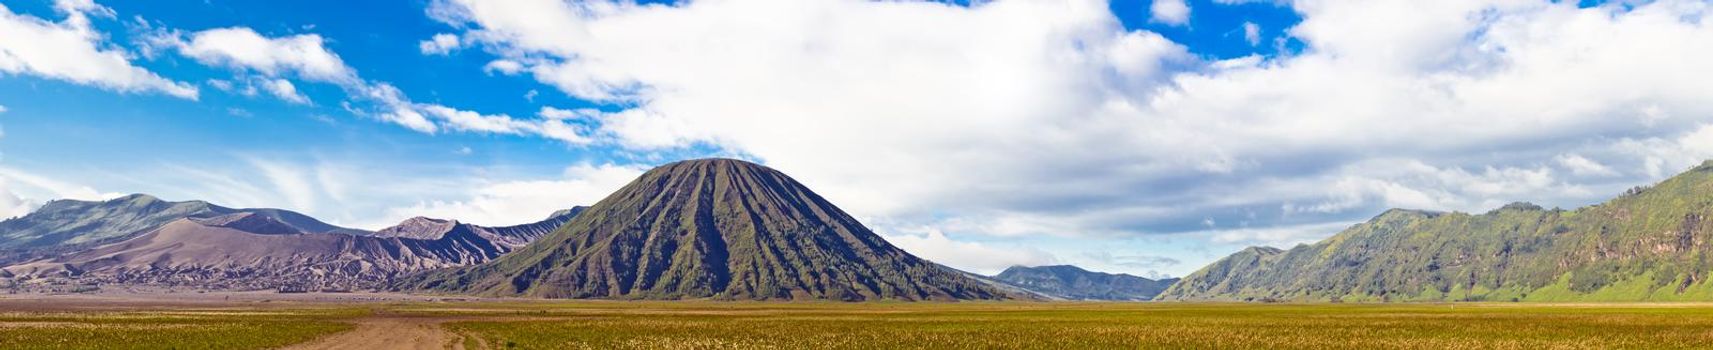 Panoramic view of volcanic landscape against blue sky with clouds. Bromo Tengger Semeru National Park, East Java, Indonesia